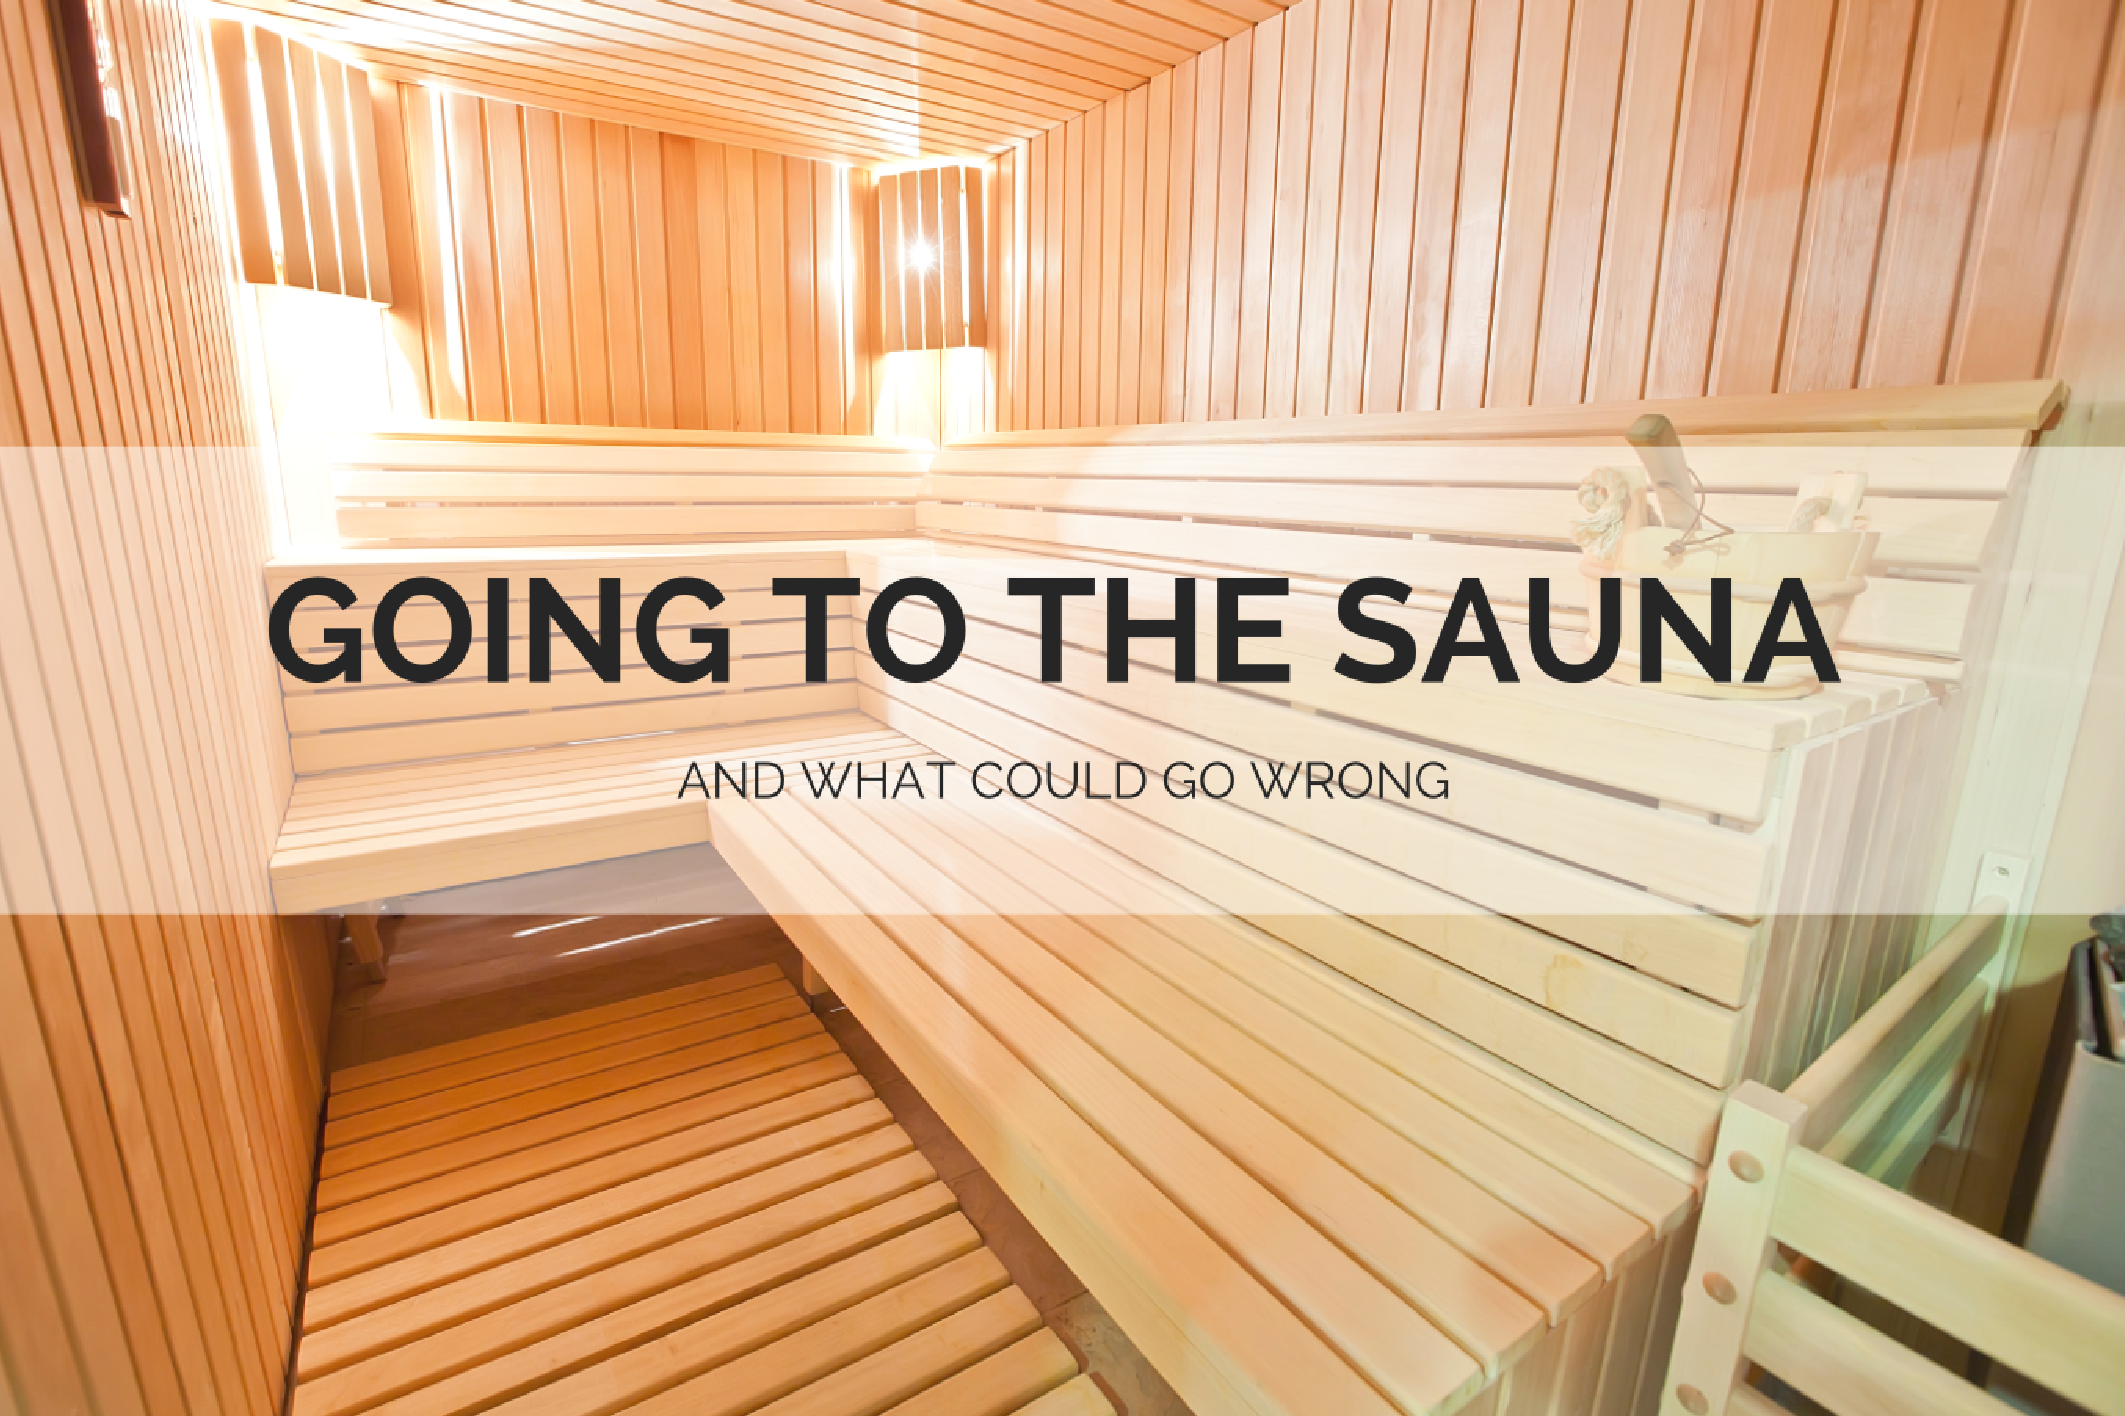 Should you take small towels to Finnish sauna? I'm going to be